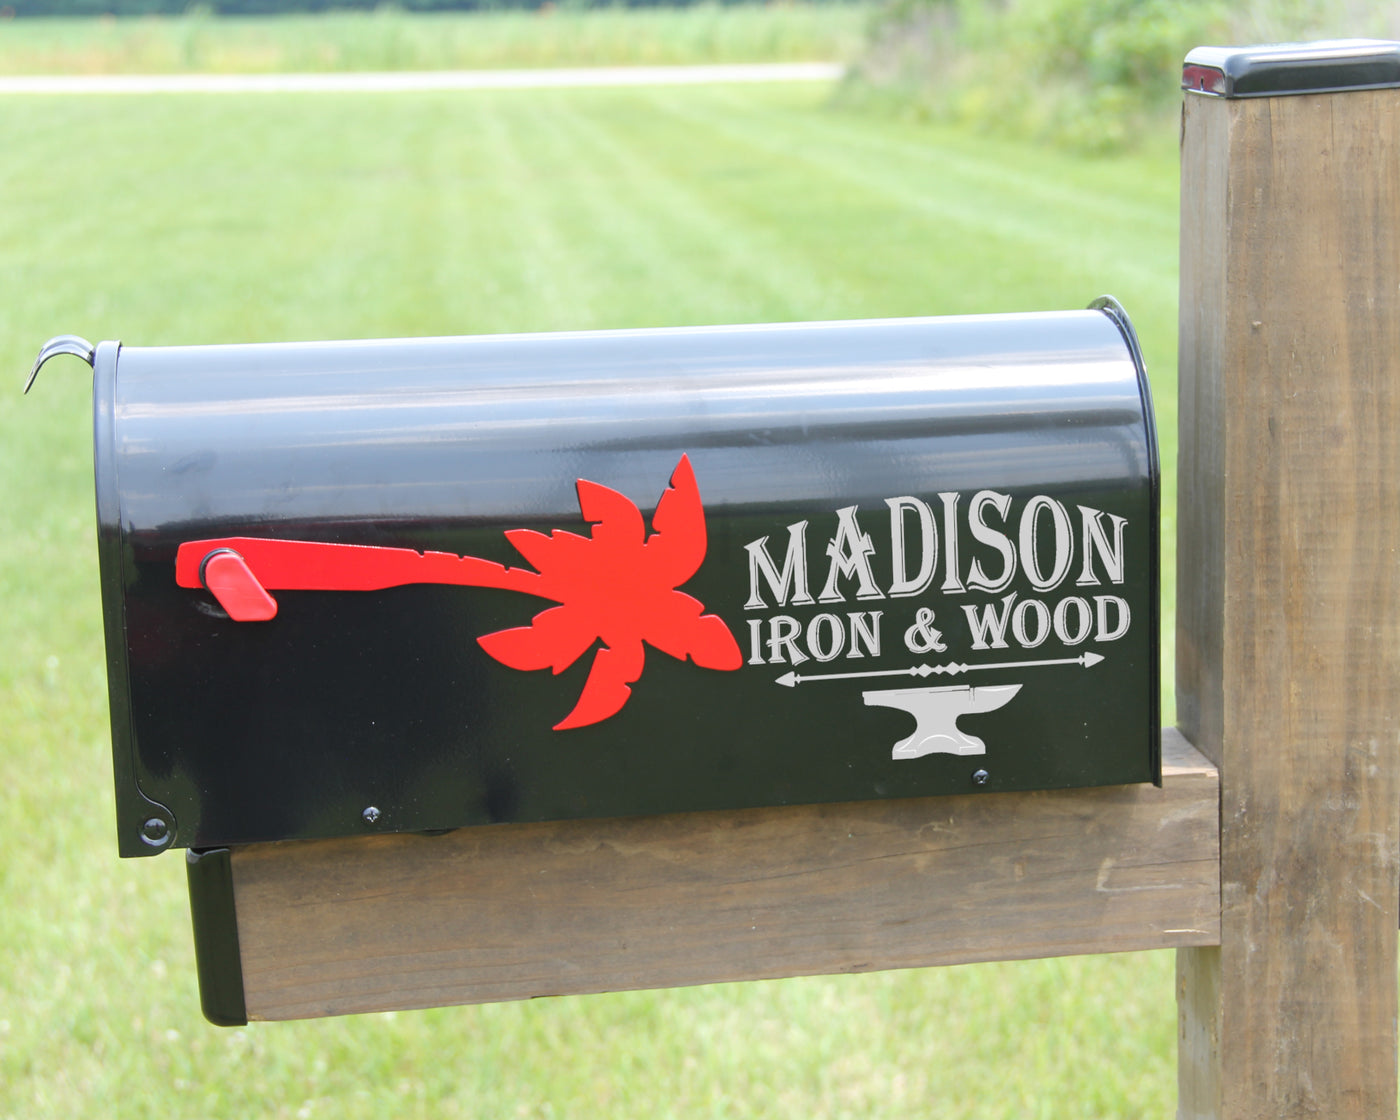 Palm Tree Mailbox Flag - Madison Iron and Wood - Mailbox Post Decor - metal outdoor decor - Steel deocrations - american made products - veteran owned business products - fencing decorations - fencing supplies - custom wall decorations - personalized wall signs - steel - decorative post caps - steel post caps - metal post caps - brackets - structural brackets - home improvement - easter - easter decorations - easter gift - easter yard decor